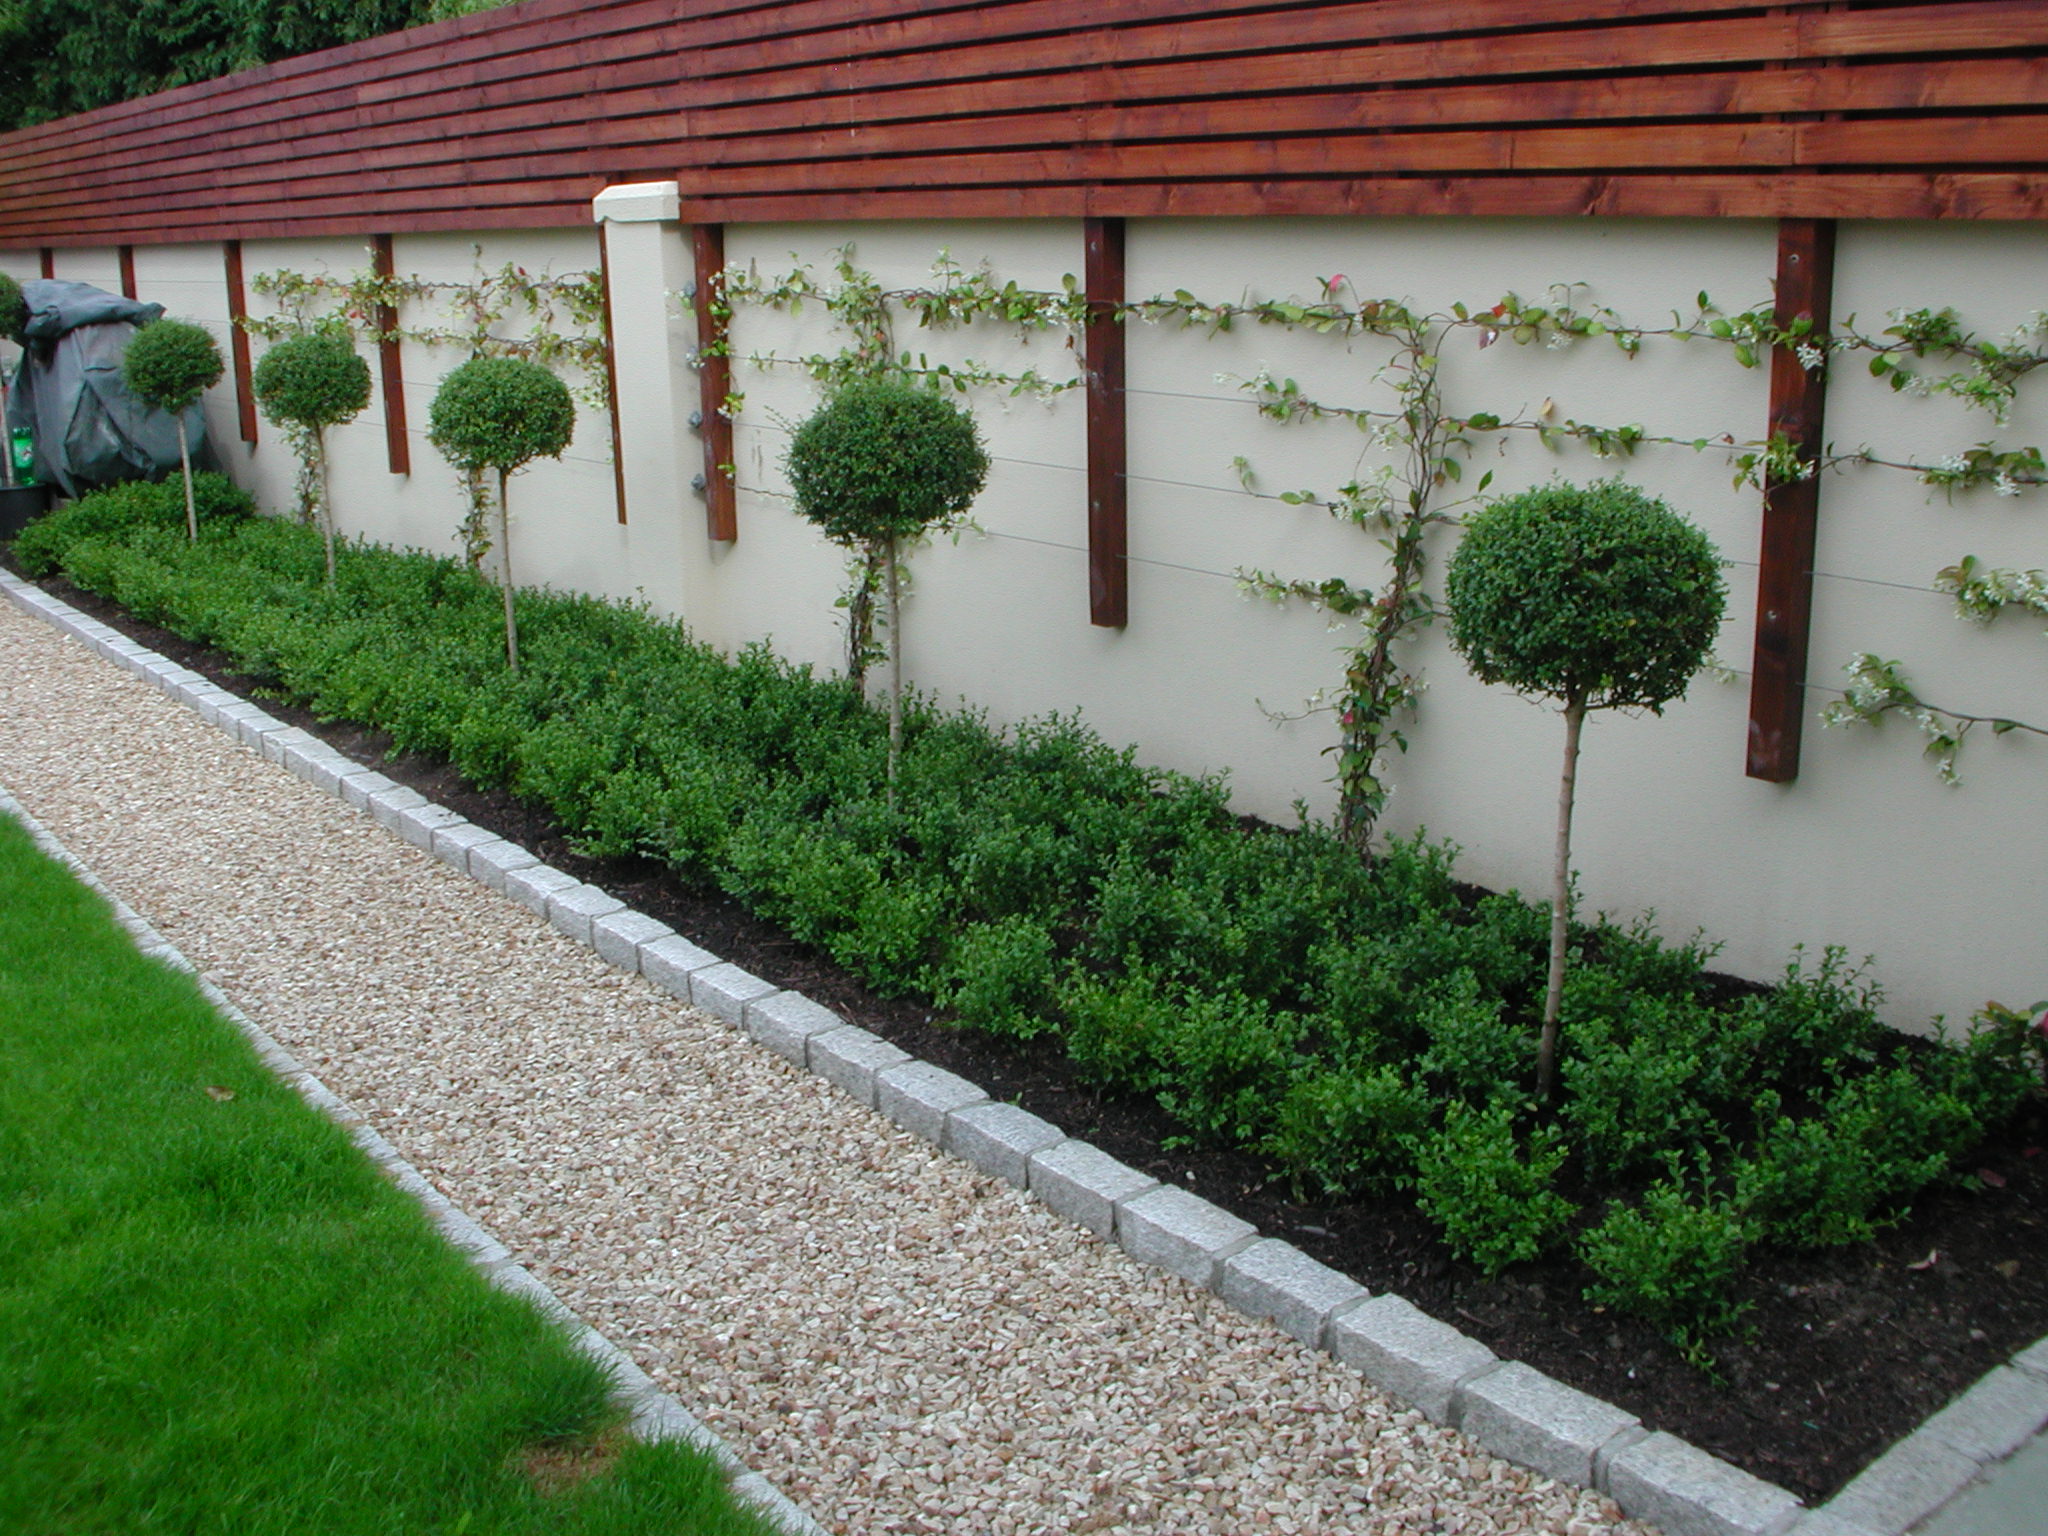 The Impact of Fencing on Garden Design